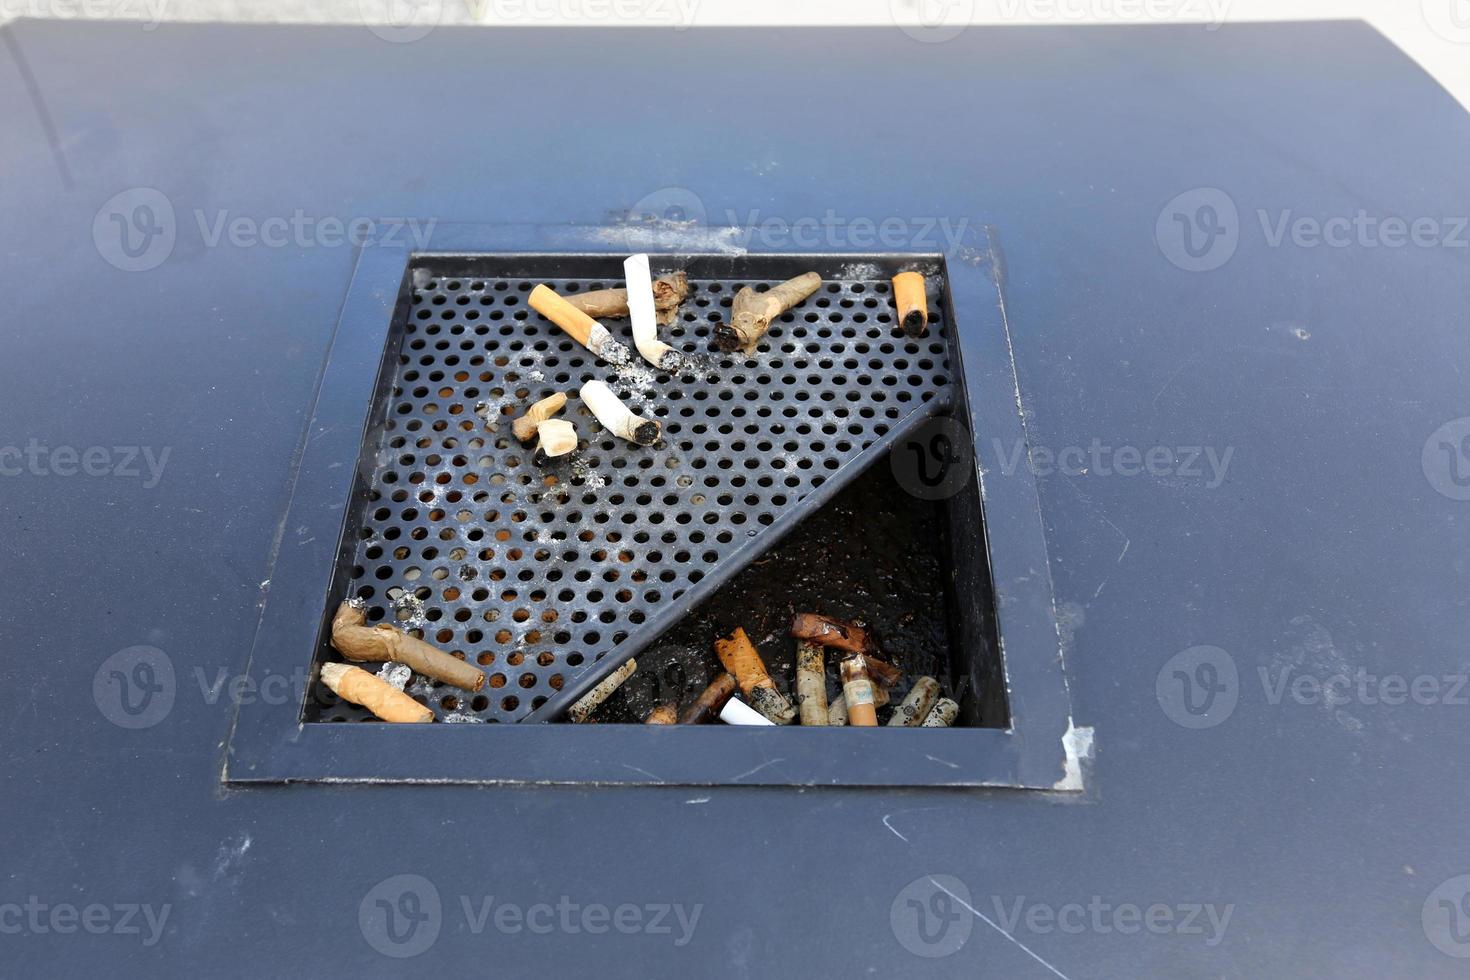 Ashtray - a container for tobacco ash, cigarette butts, cigars. photo